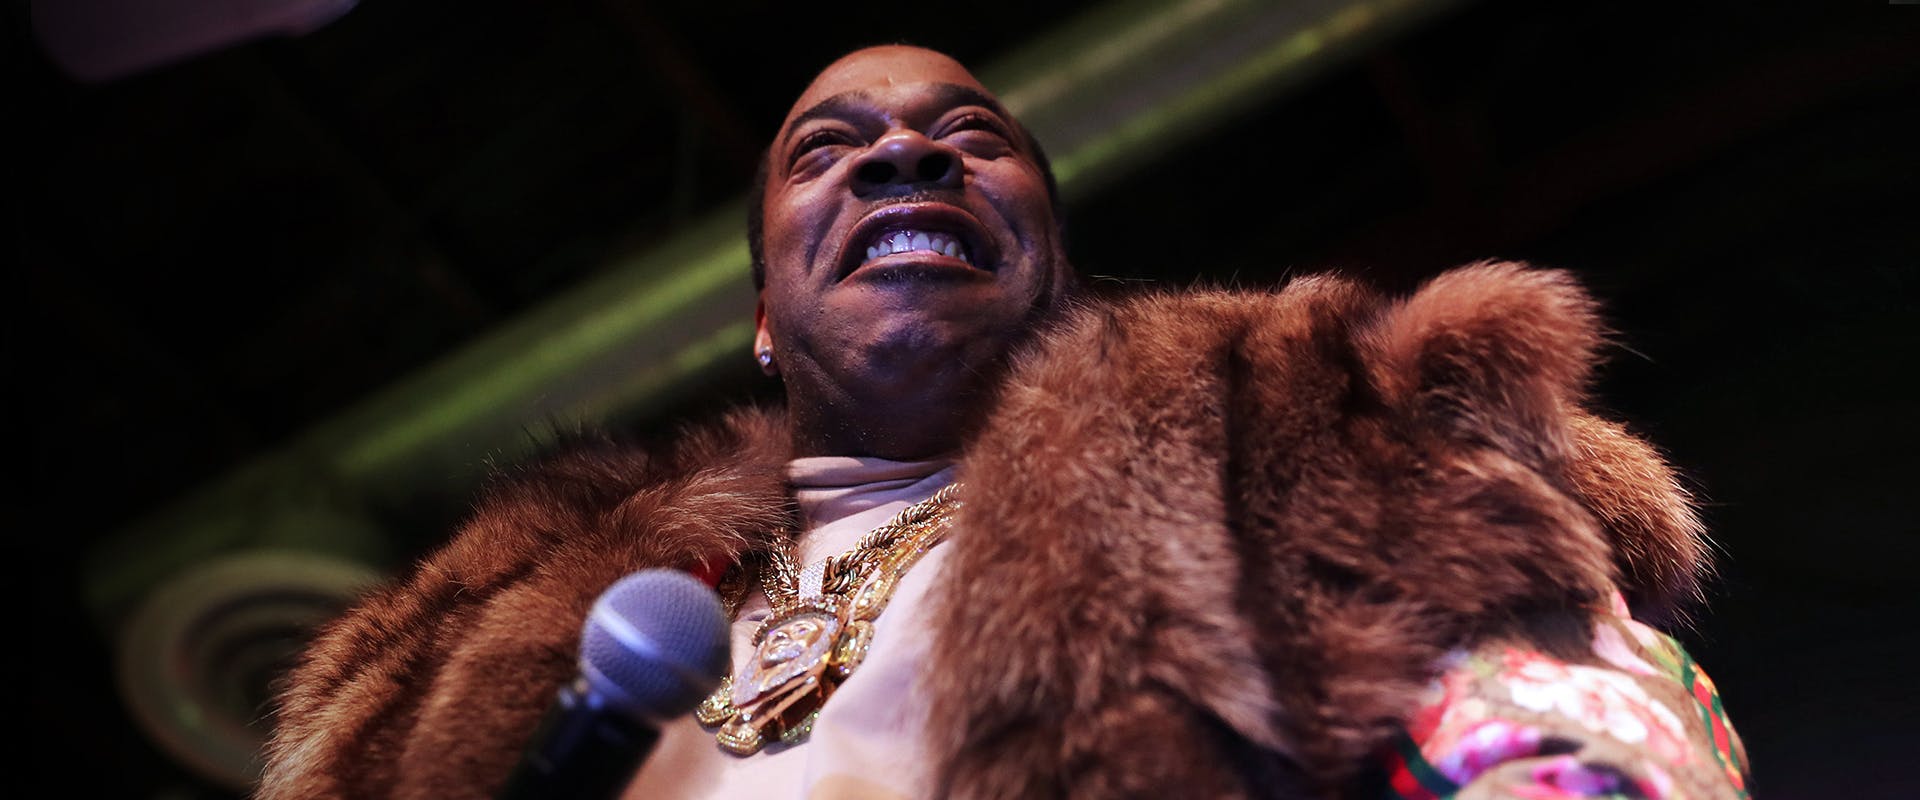 Busta Rhymes performs at the Slick Rick Birthday Celebration at Brooklyn Bowl on January 10, 2020 in New York City. 